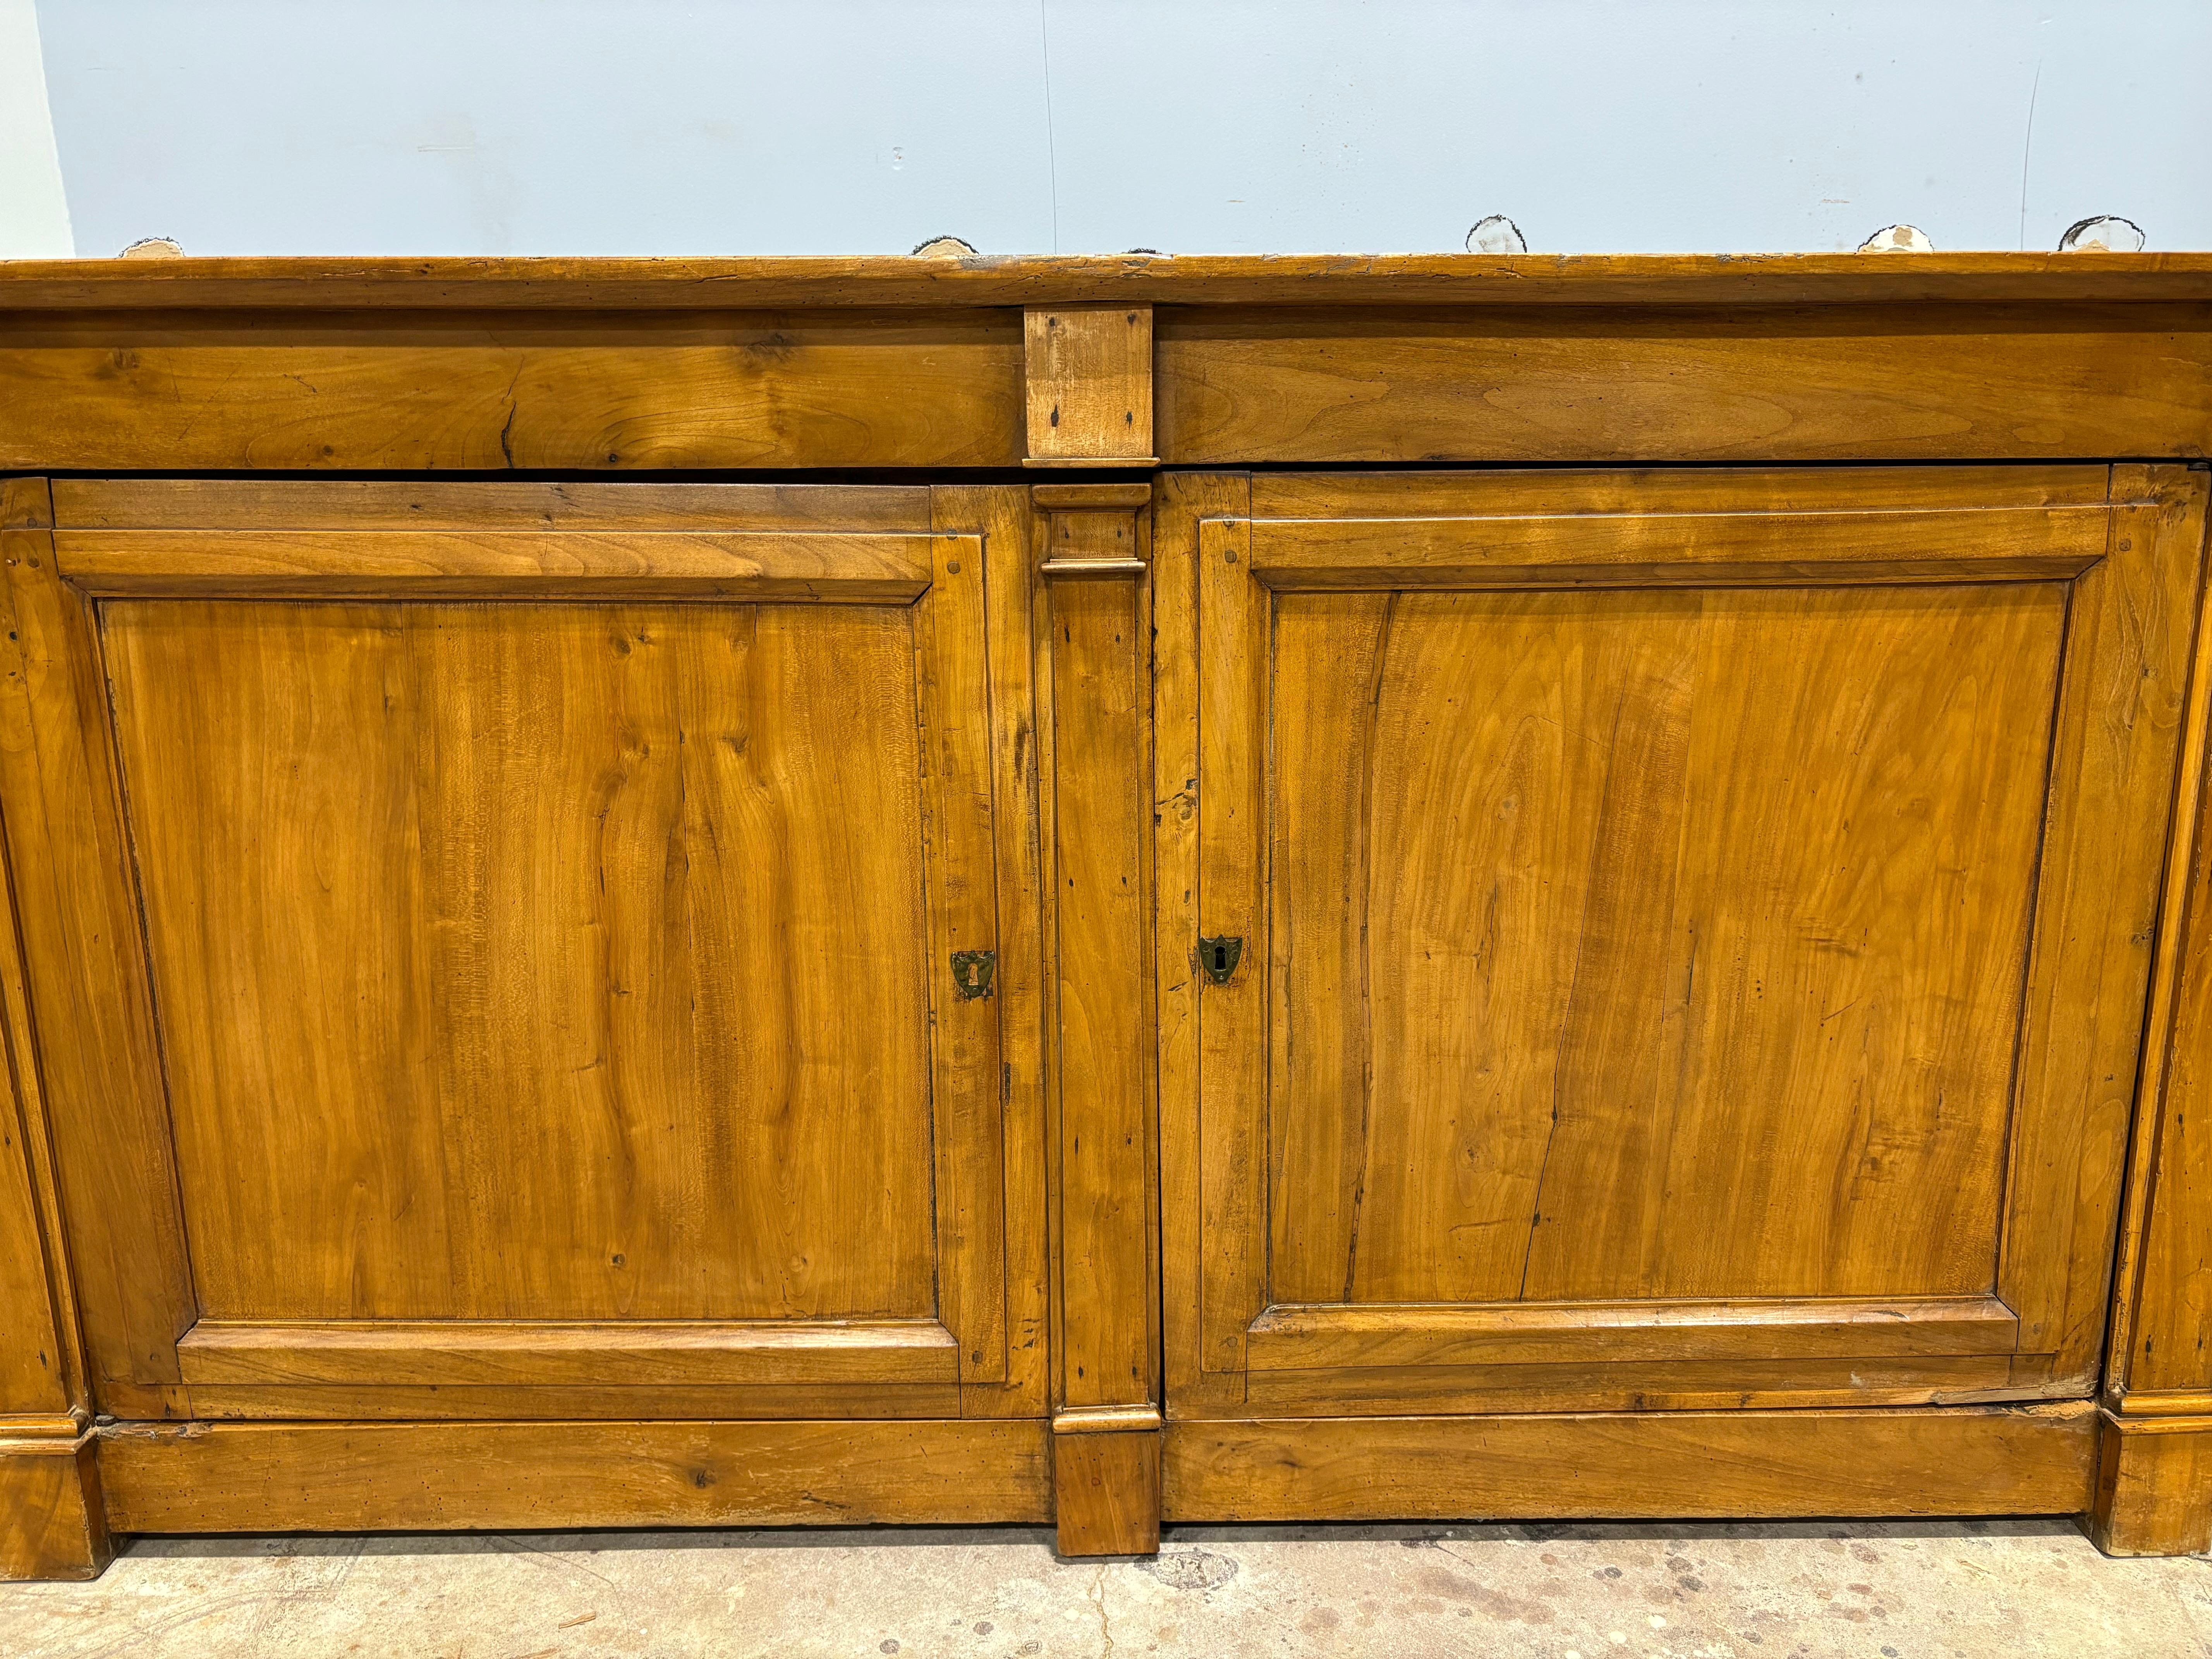 This is a long buffet, close to the size of a sideboard. It has 3 flat columns. The wood is blond walnut.